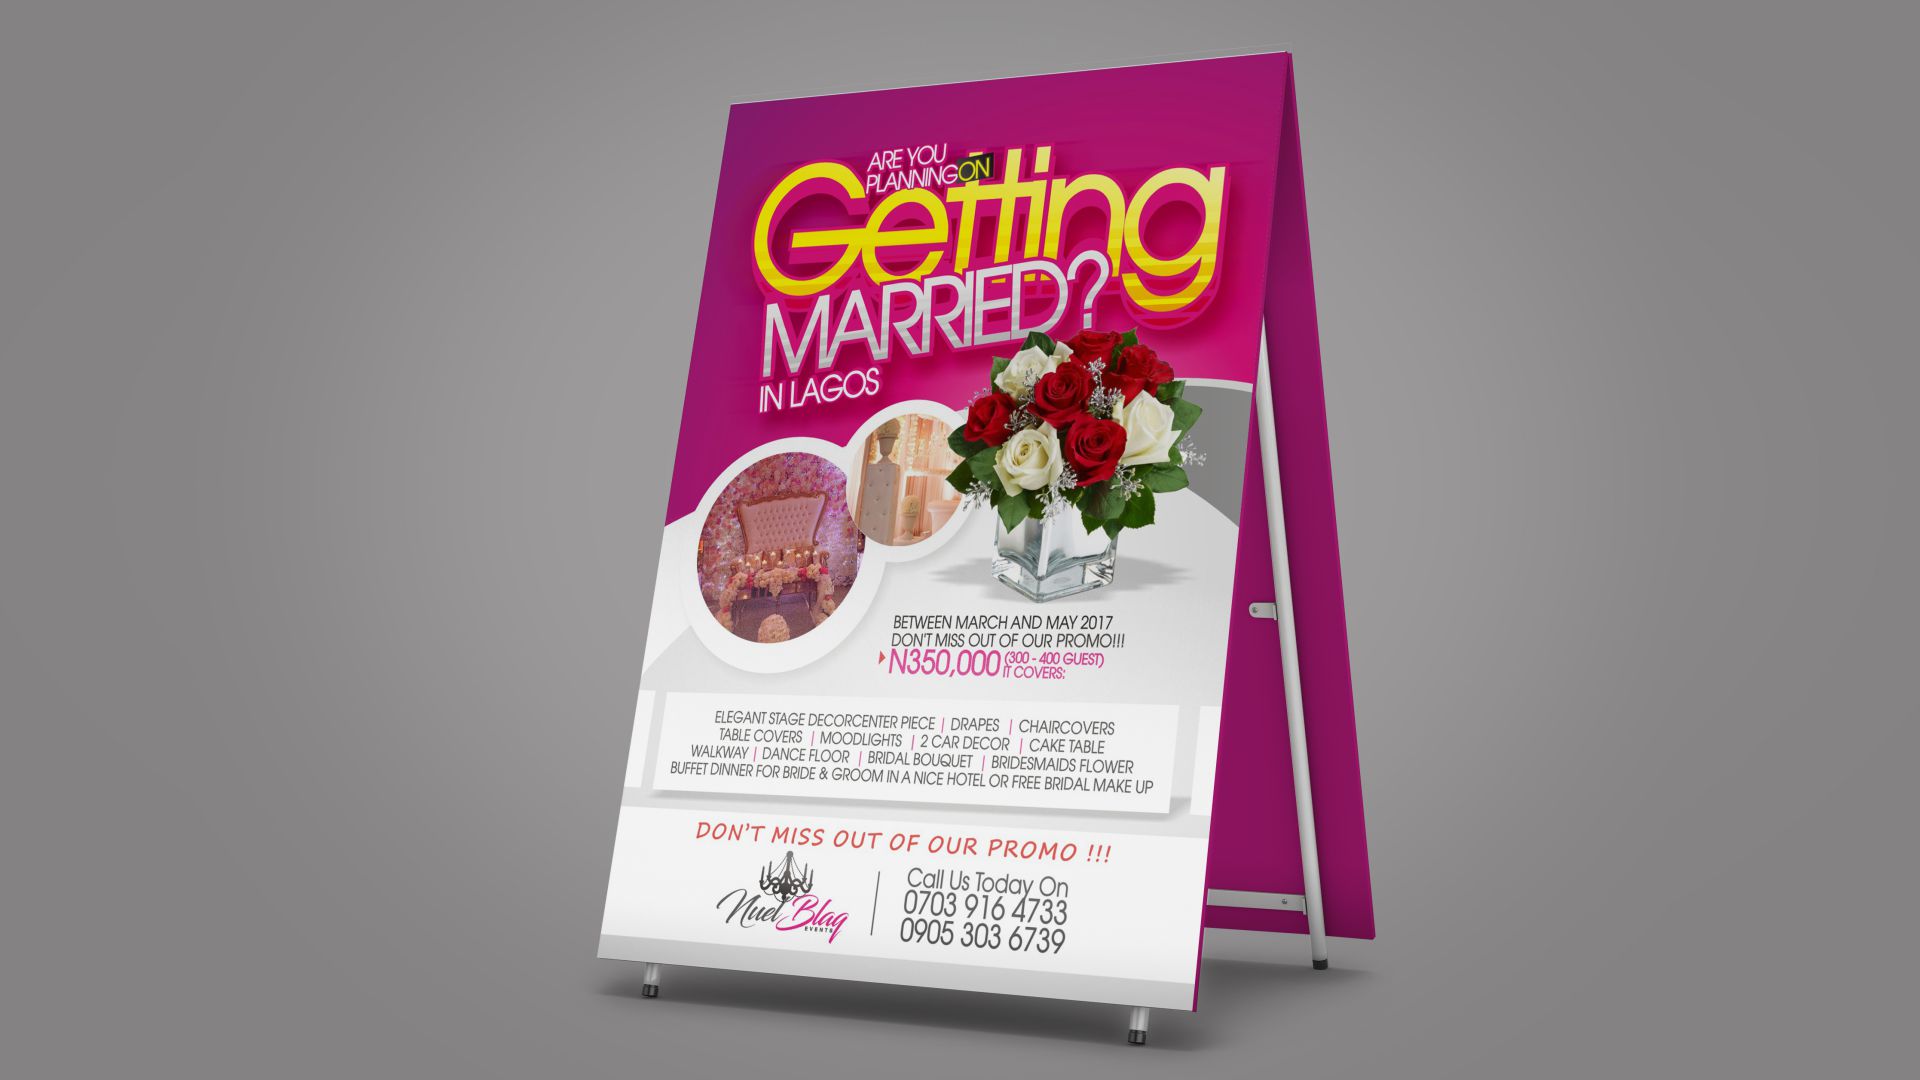 Advertising Sandwich Board Poster Design and Printing in Lagos Nigeria